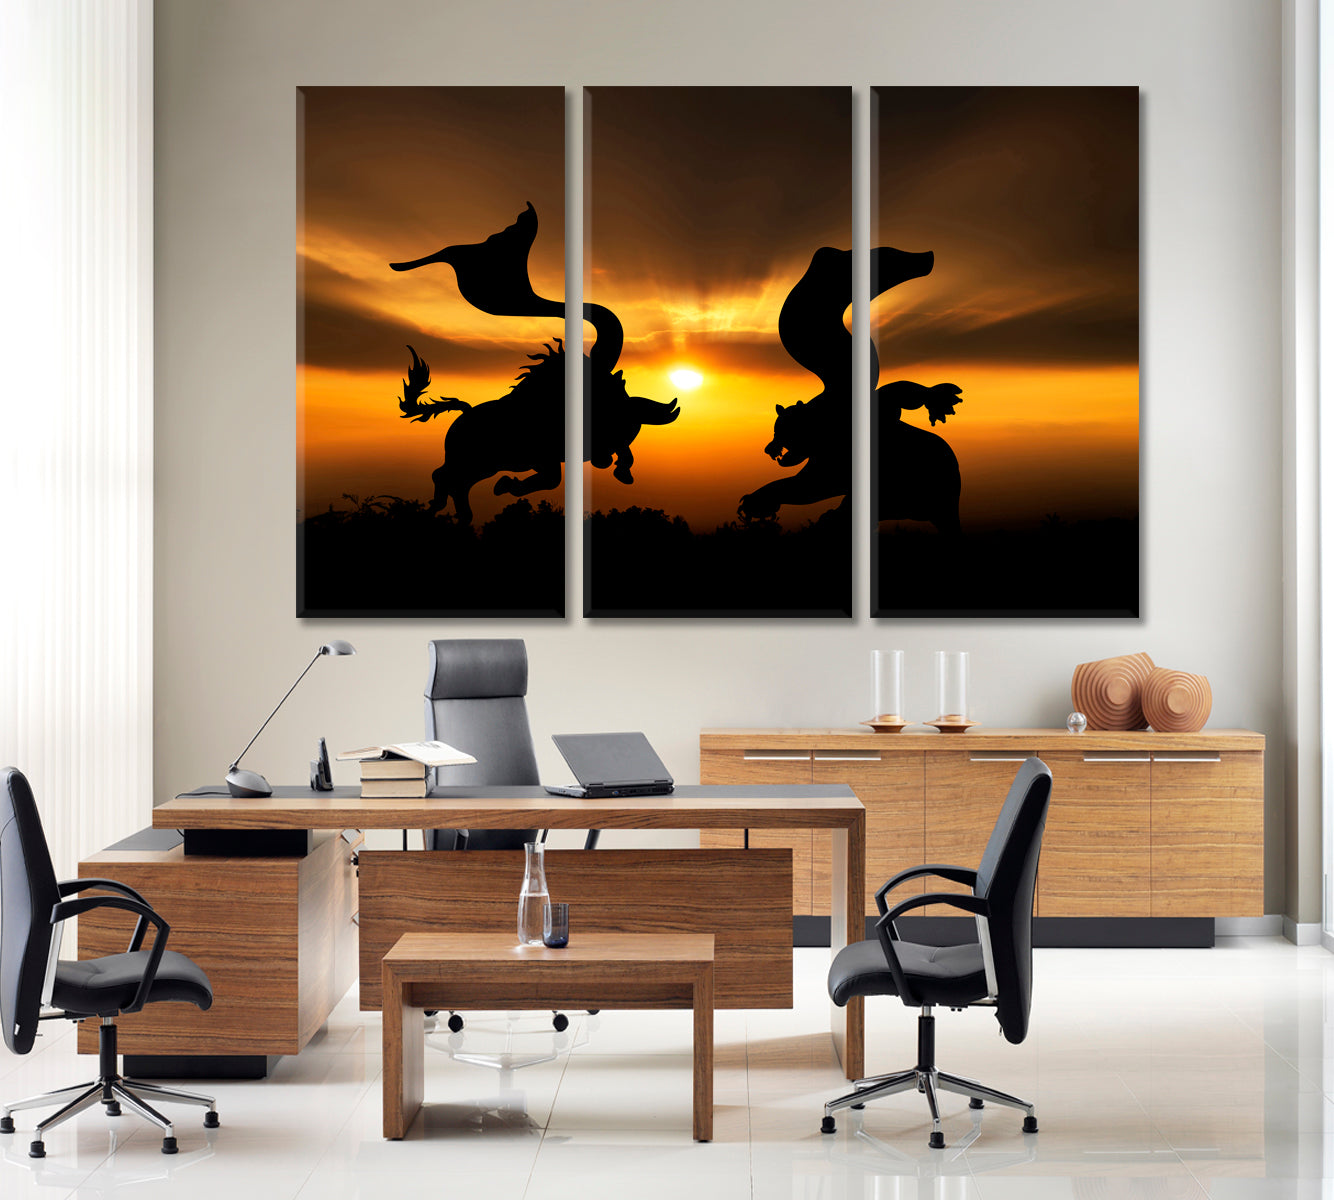 BULL AND BEAR ICON Business Market Stock Finance Exchange Office Wall Art Canvas Print Artesty 3 panels 36" x 24" 